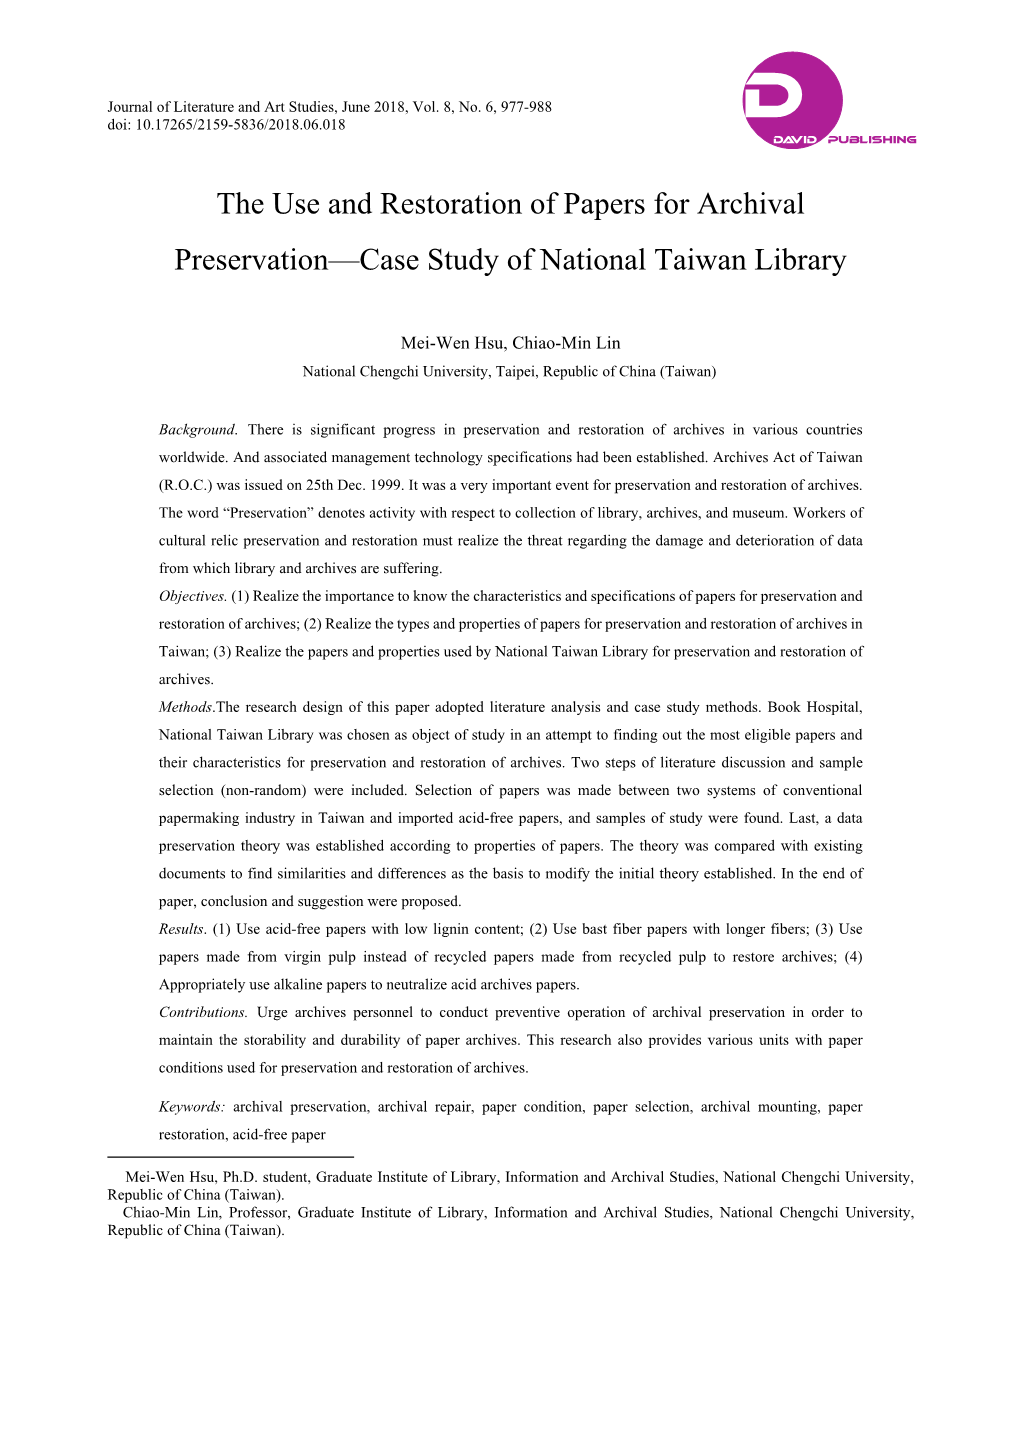 The Use and Restoration of Papers for Archival Preservation—Case Study of National Taiwan Library